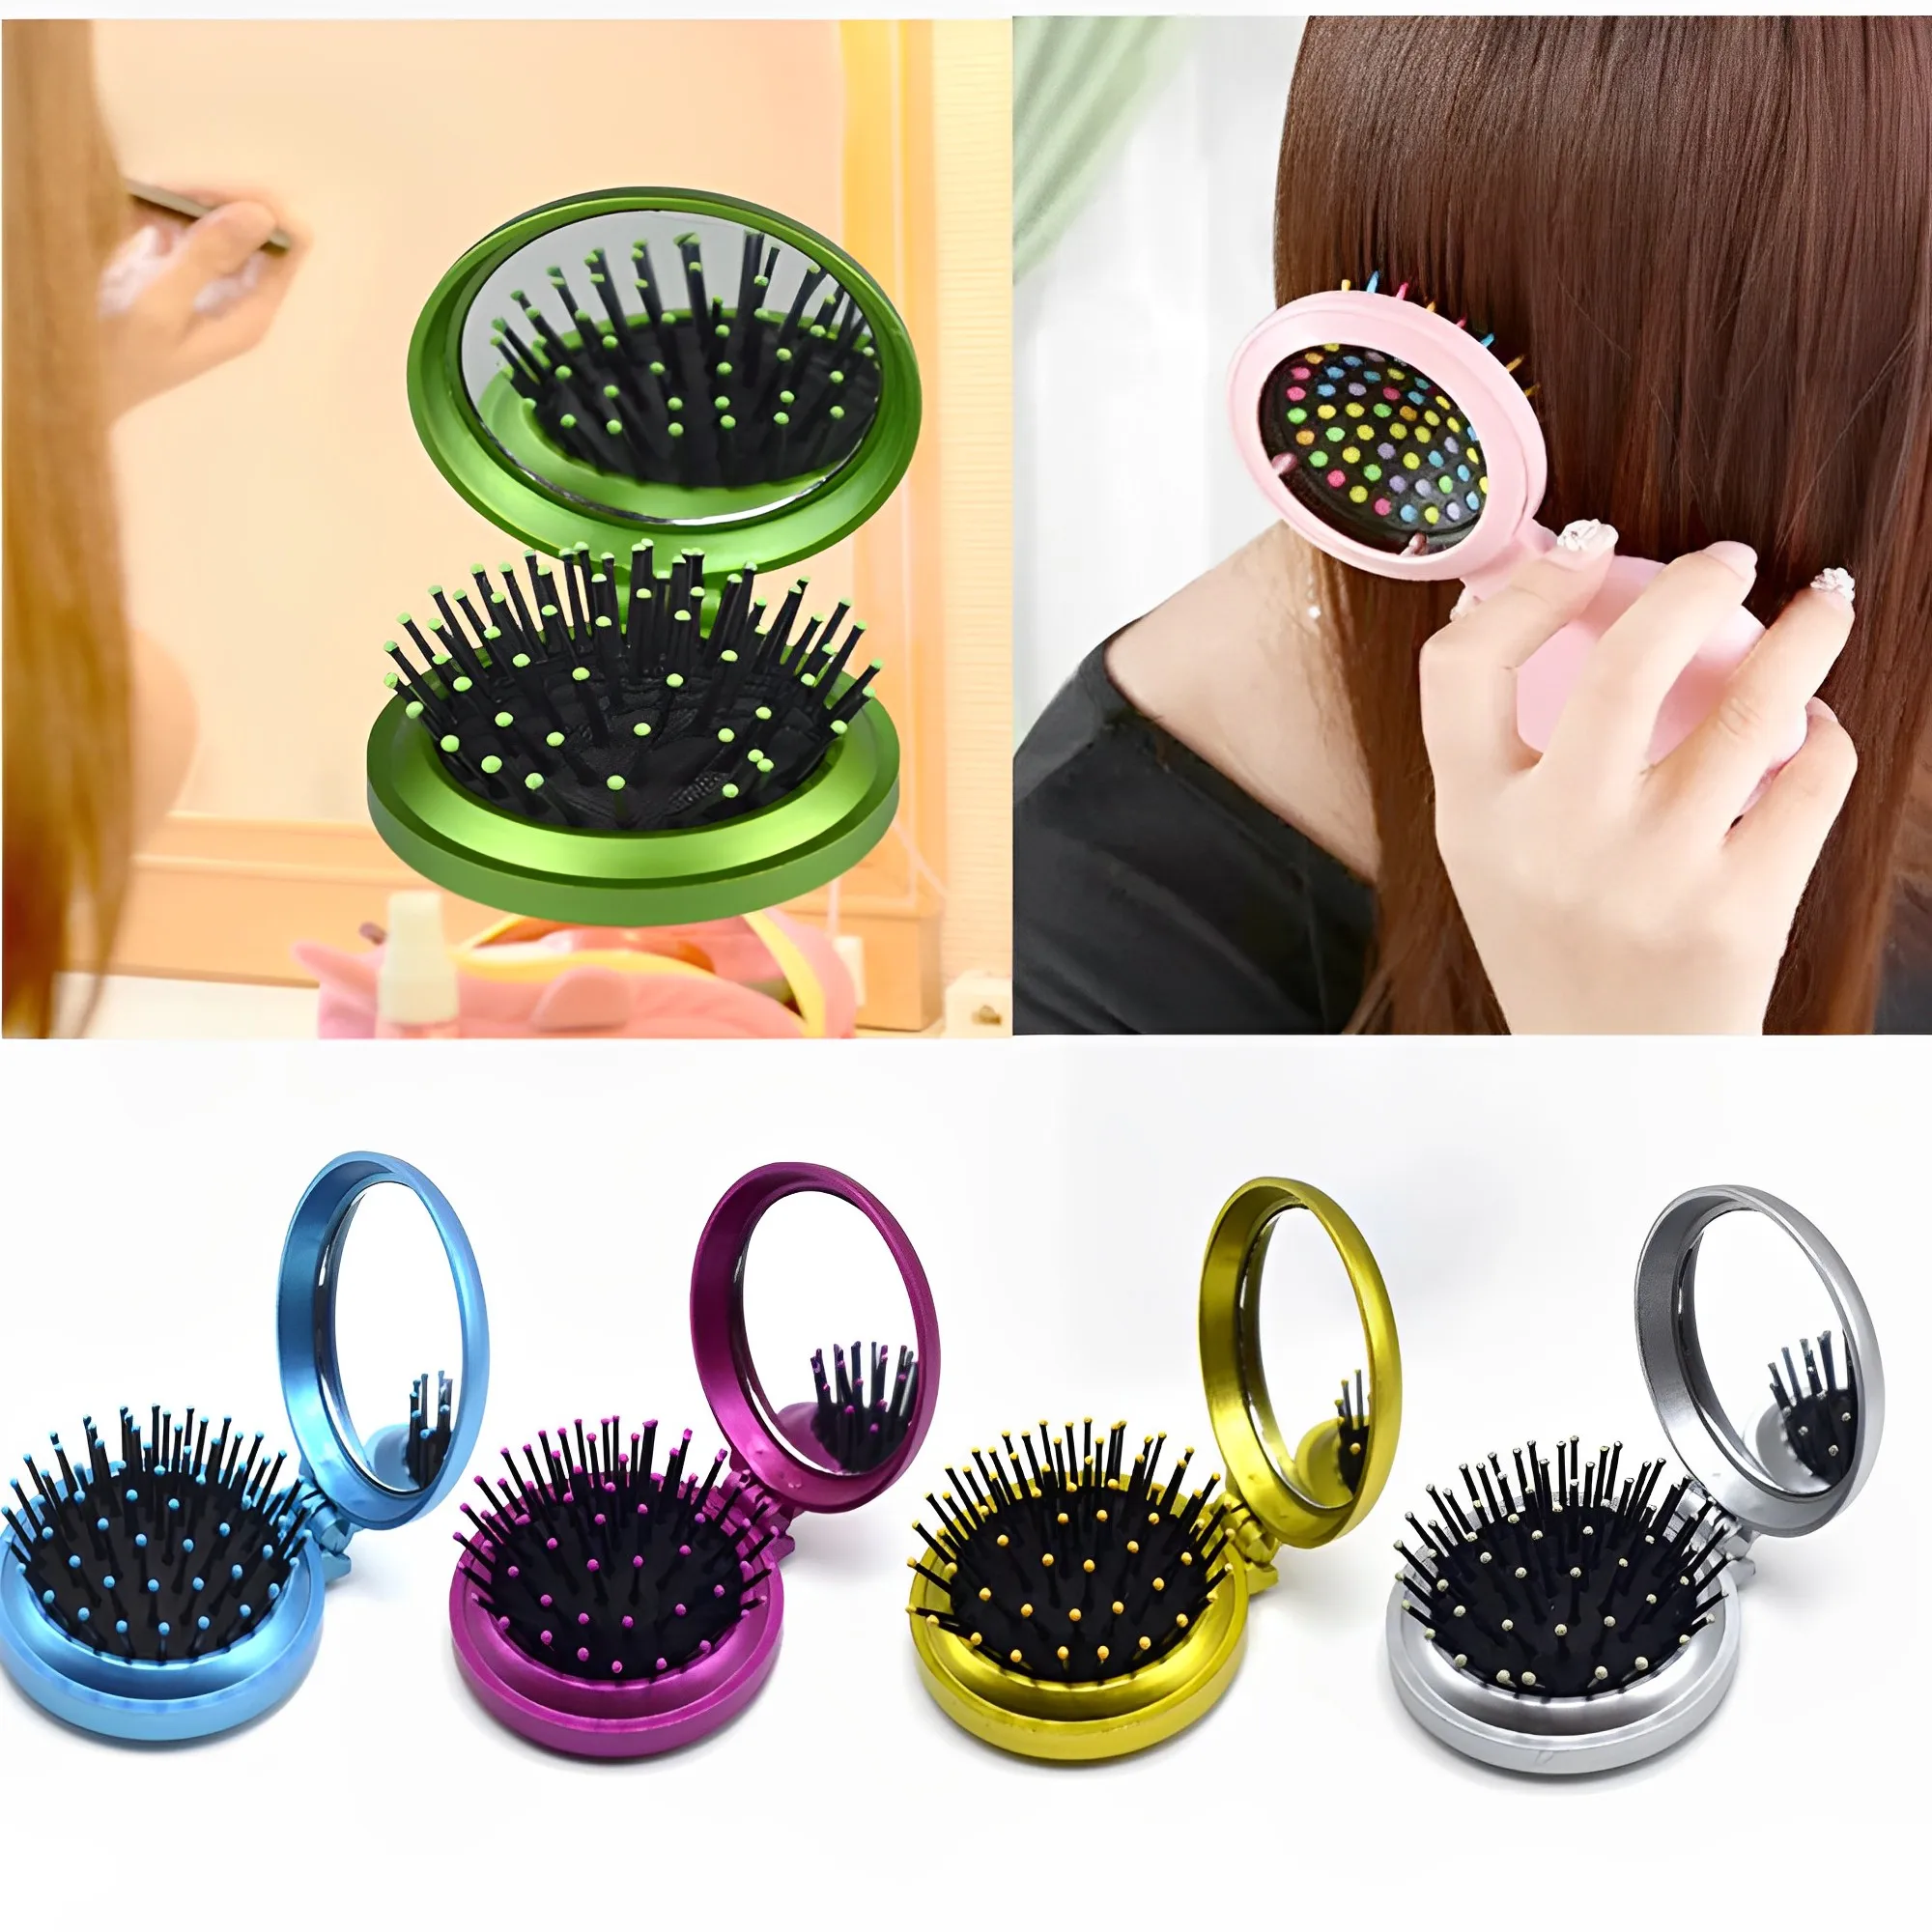 Makeup Comb Hair Brush Styling Tool Portable Mini Folding Comb Airbag Massage Round Travel Hair Brush with Mirror Styling